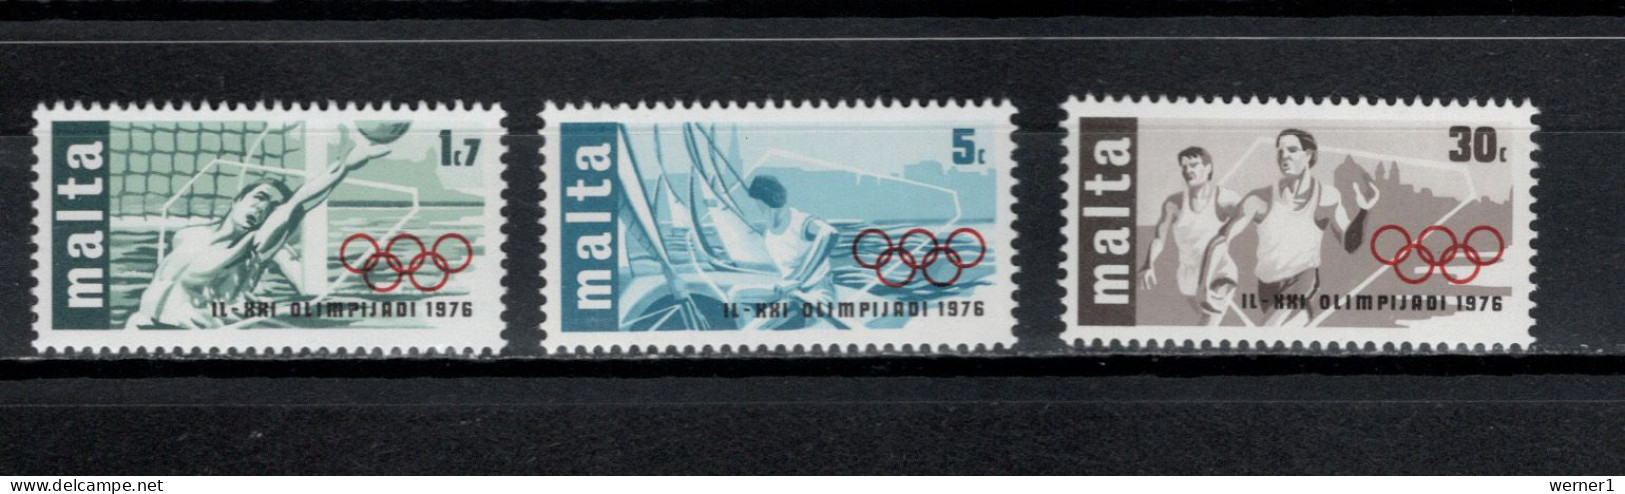 Malta 1976 Olympic Games Montreal, Waterball, Sailing, Athletics Set Of 3 MNH - Sommer 1976: Montreal